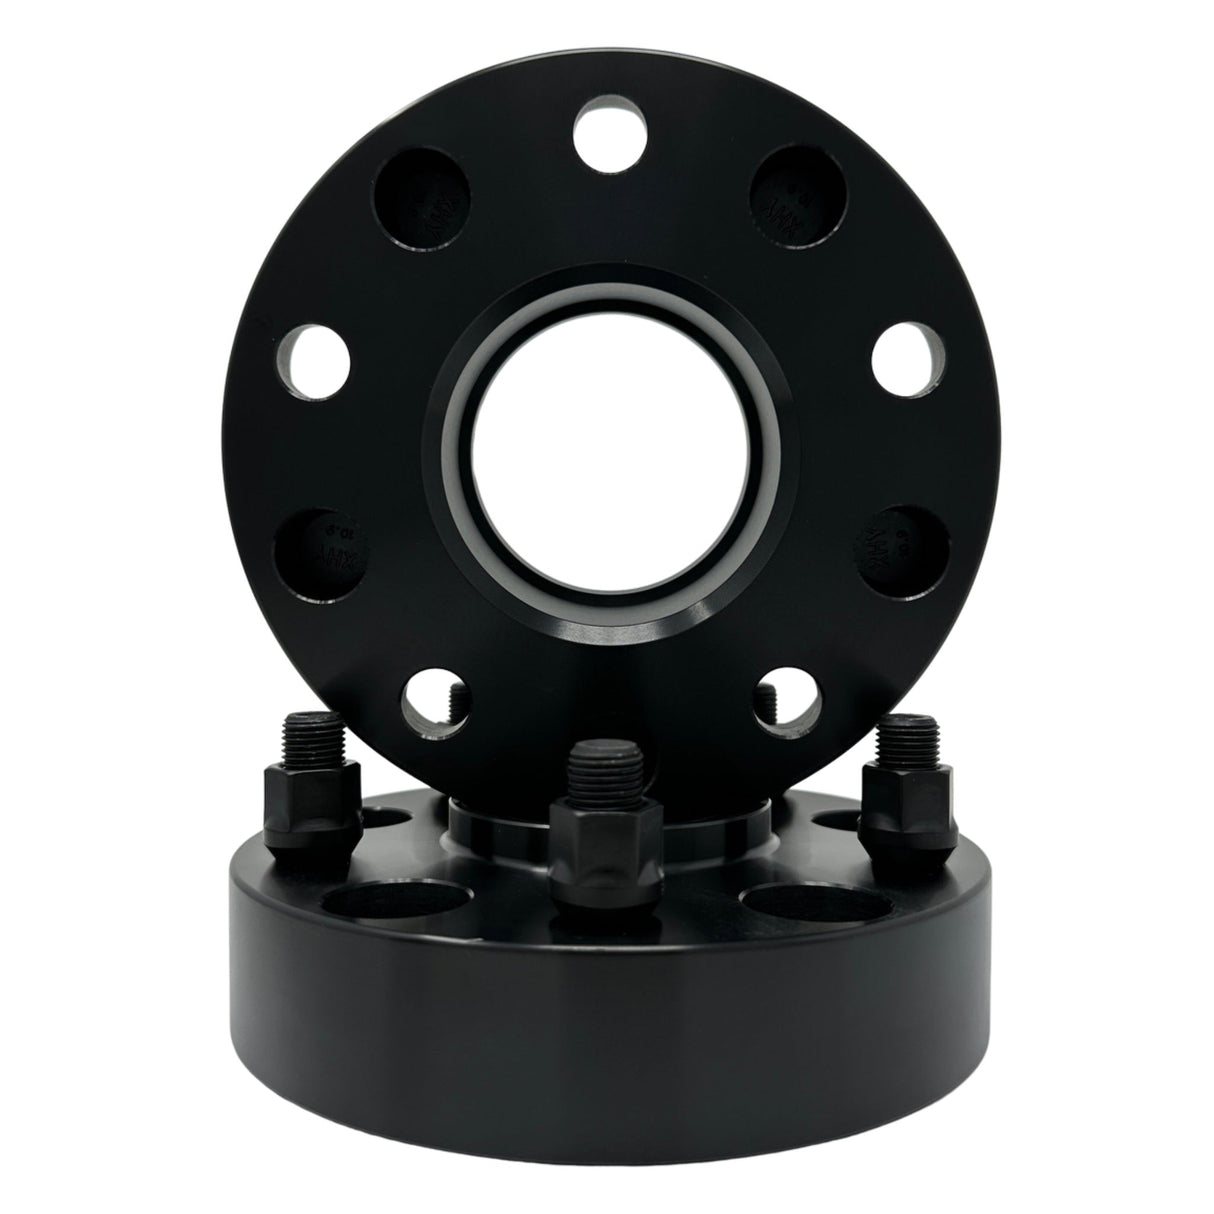 5x4.5 To 5x5 Jeep Hub Centric Wheel Adapters Use New Jeep JK / JL / JT Wheels / Rims on Older Model Wrangler TJ / YJ   | Hub Centric & Wheel Centric 71.5 Center Bore 14x1.5 Jeep OEM Spec Studs USA Made 5x114.3 To 5x127 Spacers